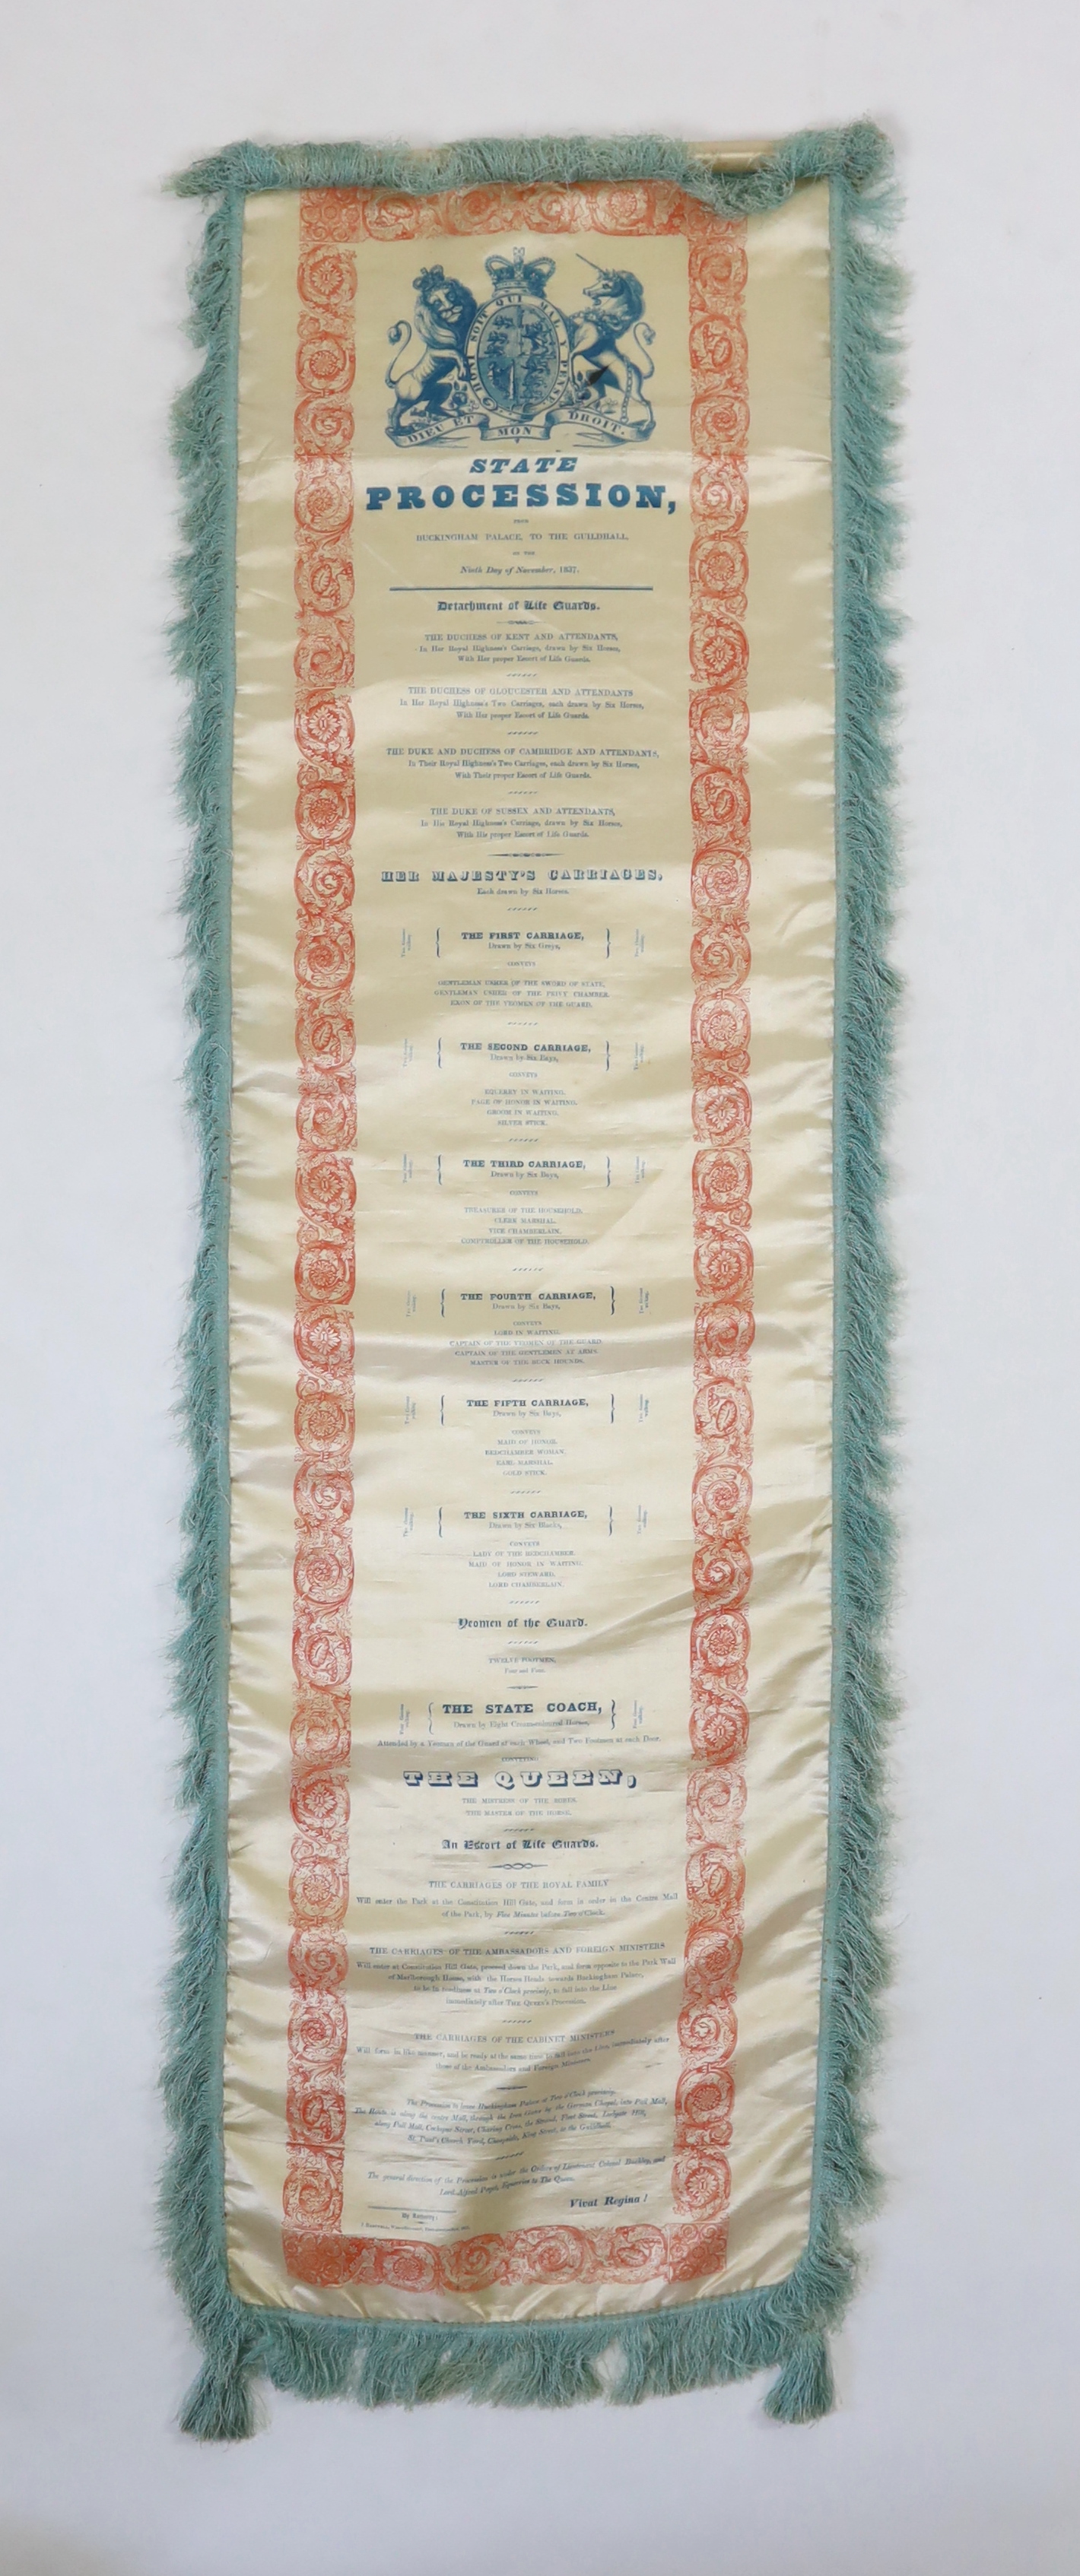 A silk banner; State Procession from Buckingham Palace to The Guildhall on the Ninth Day of November 1837. The day of Queen Victoria’s Coronation. Printed with the Royal Coat of Arms and a list of the guards, carriages a